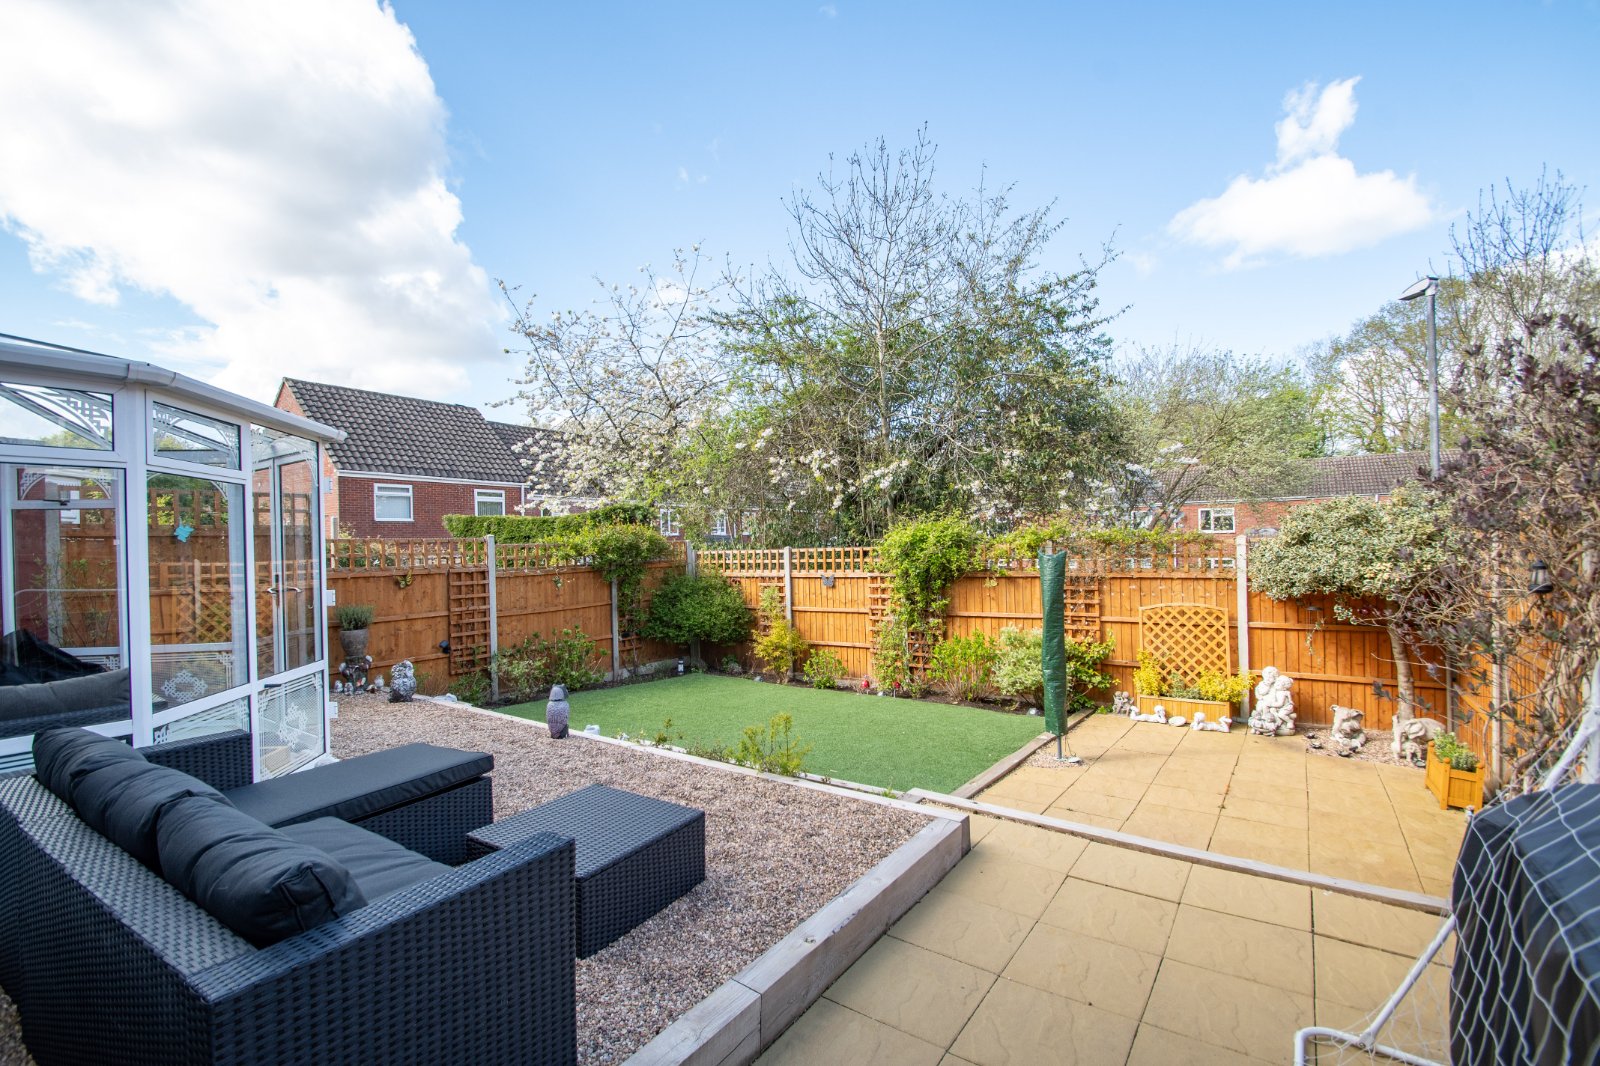 3 bed house for sale in Hopyard Lane, Winyates West  - Property Image 11